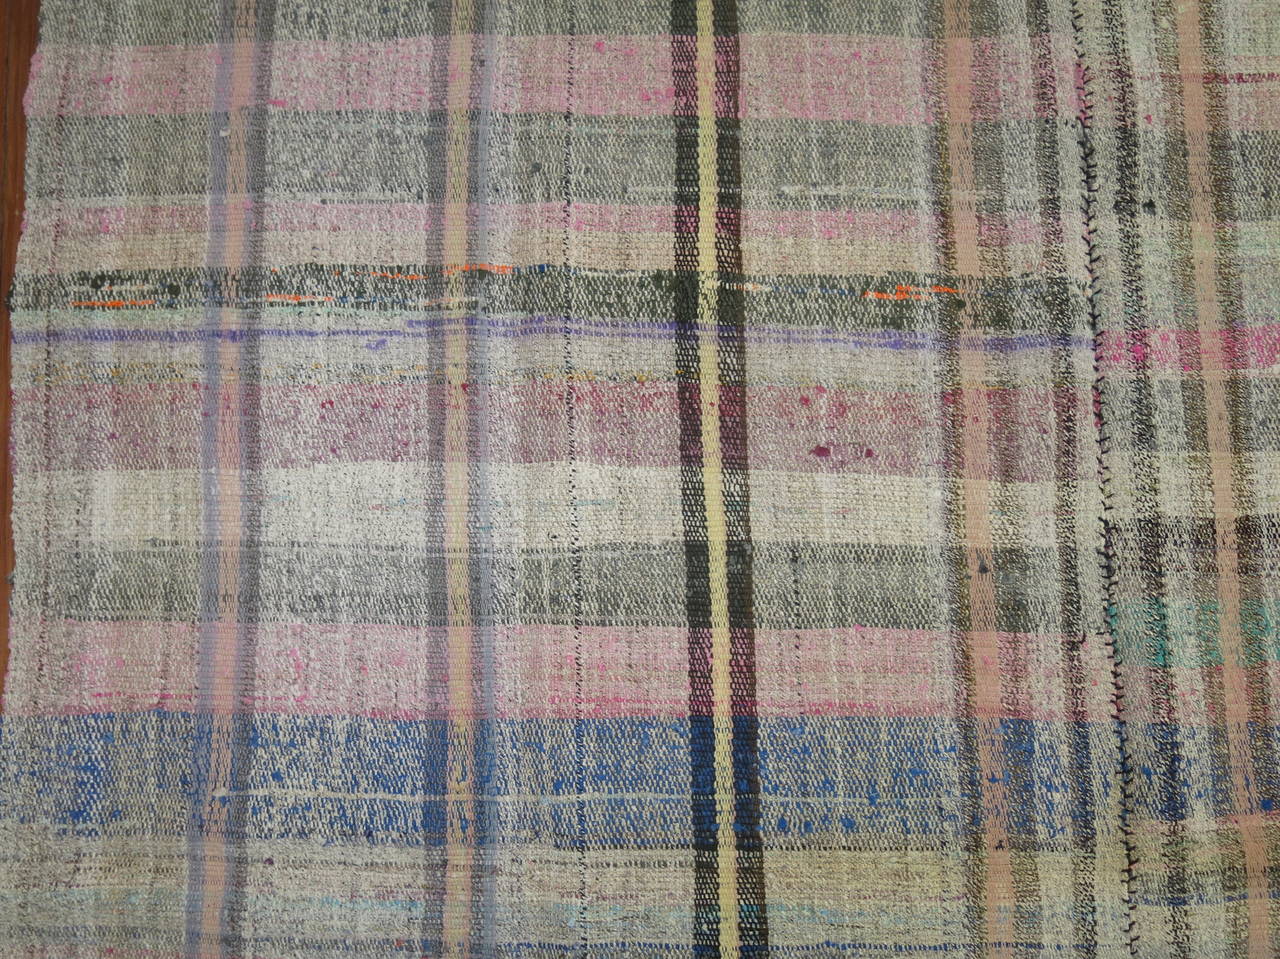 Midcentury Kilim with all-over plaid motif. Light green, pinks, gray, ivory are our favorite colors in this piece

Measures: 6'1